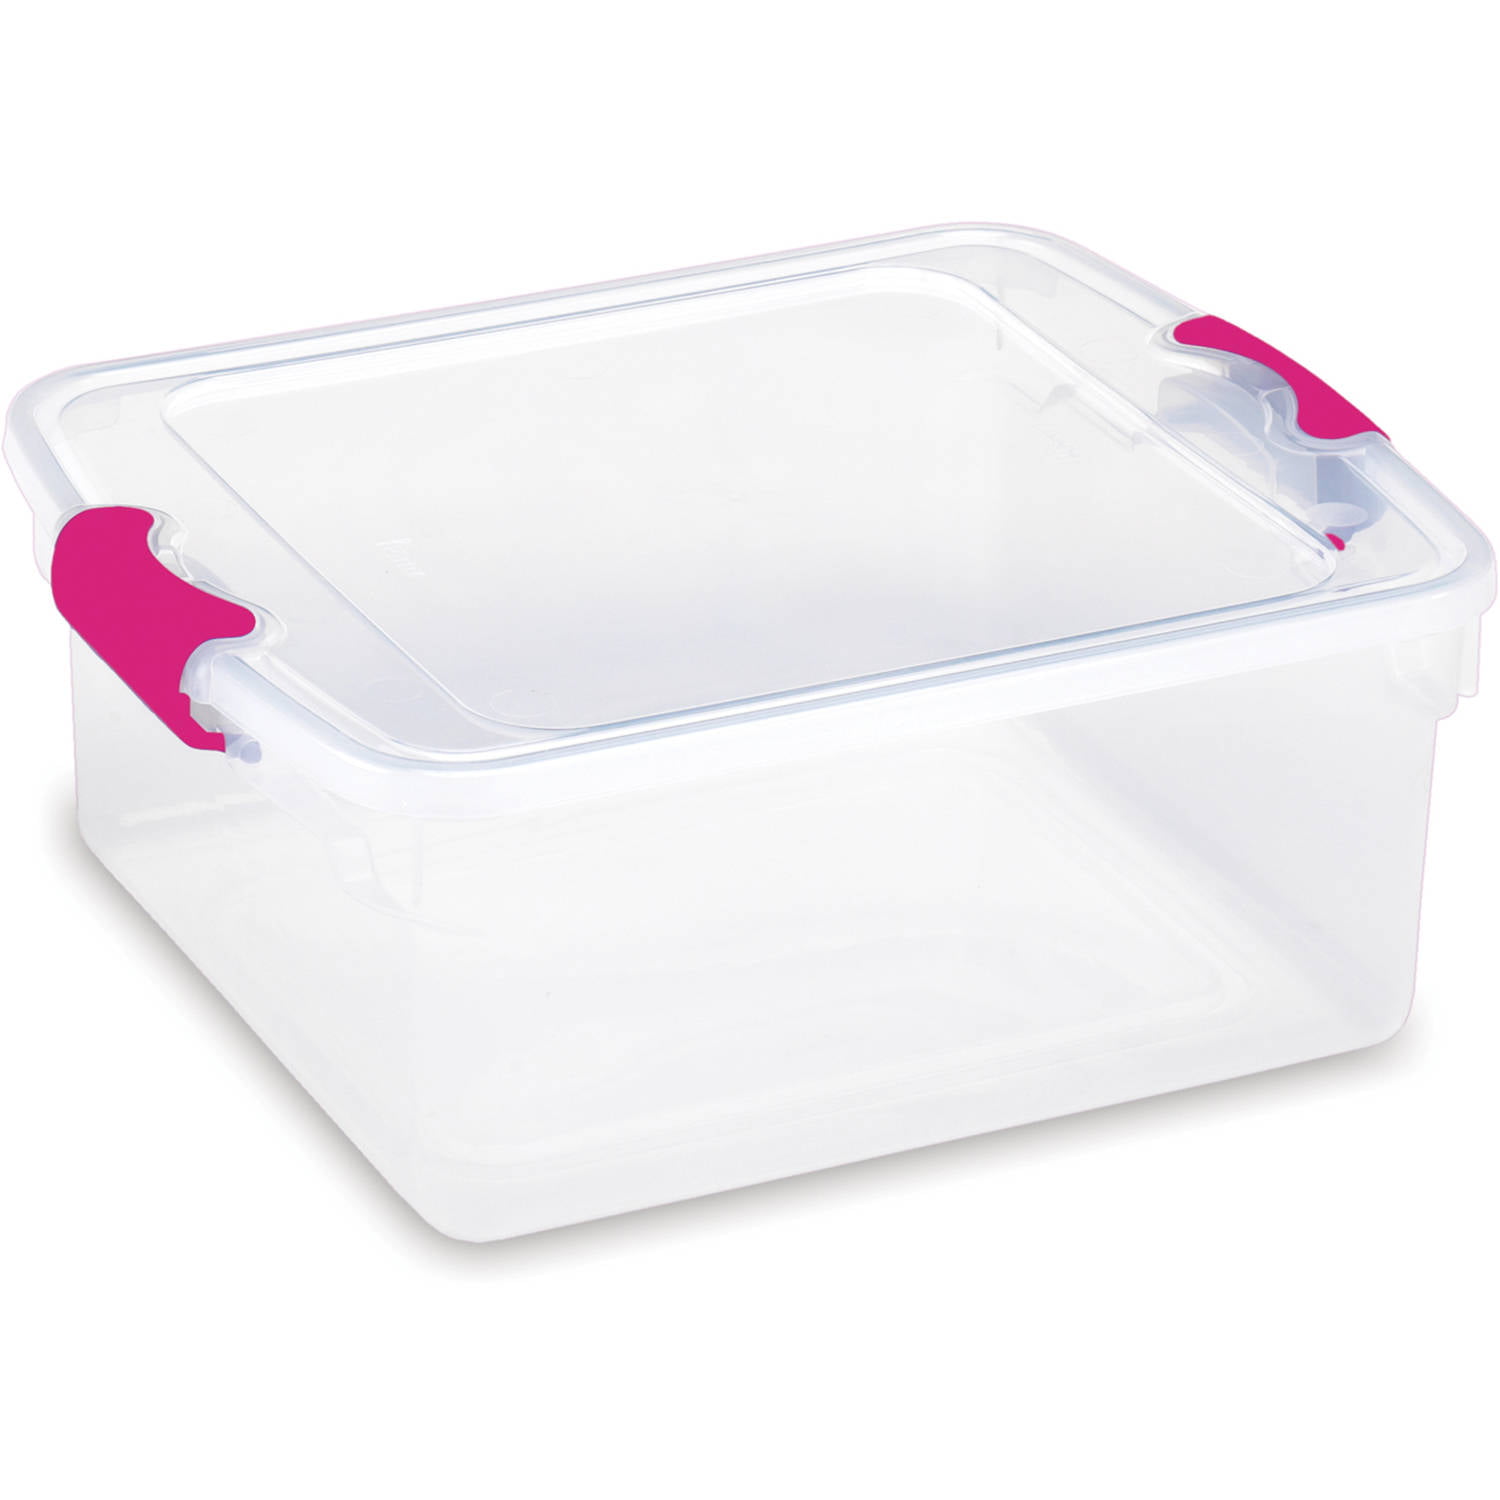 Homz 15.5 Qt. Plastic Storage Tote with Latches, Clear/Pink (Set of 8) - www.bagssaleusa.com